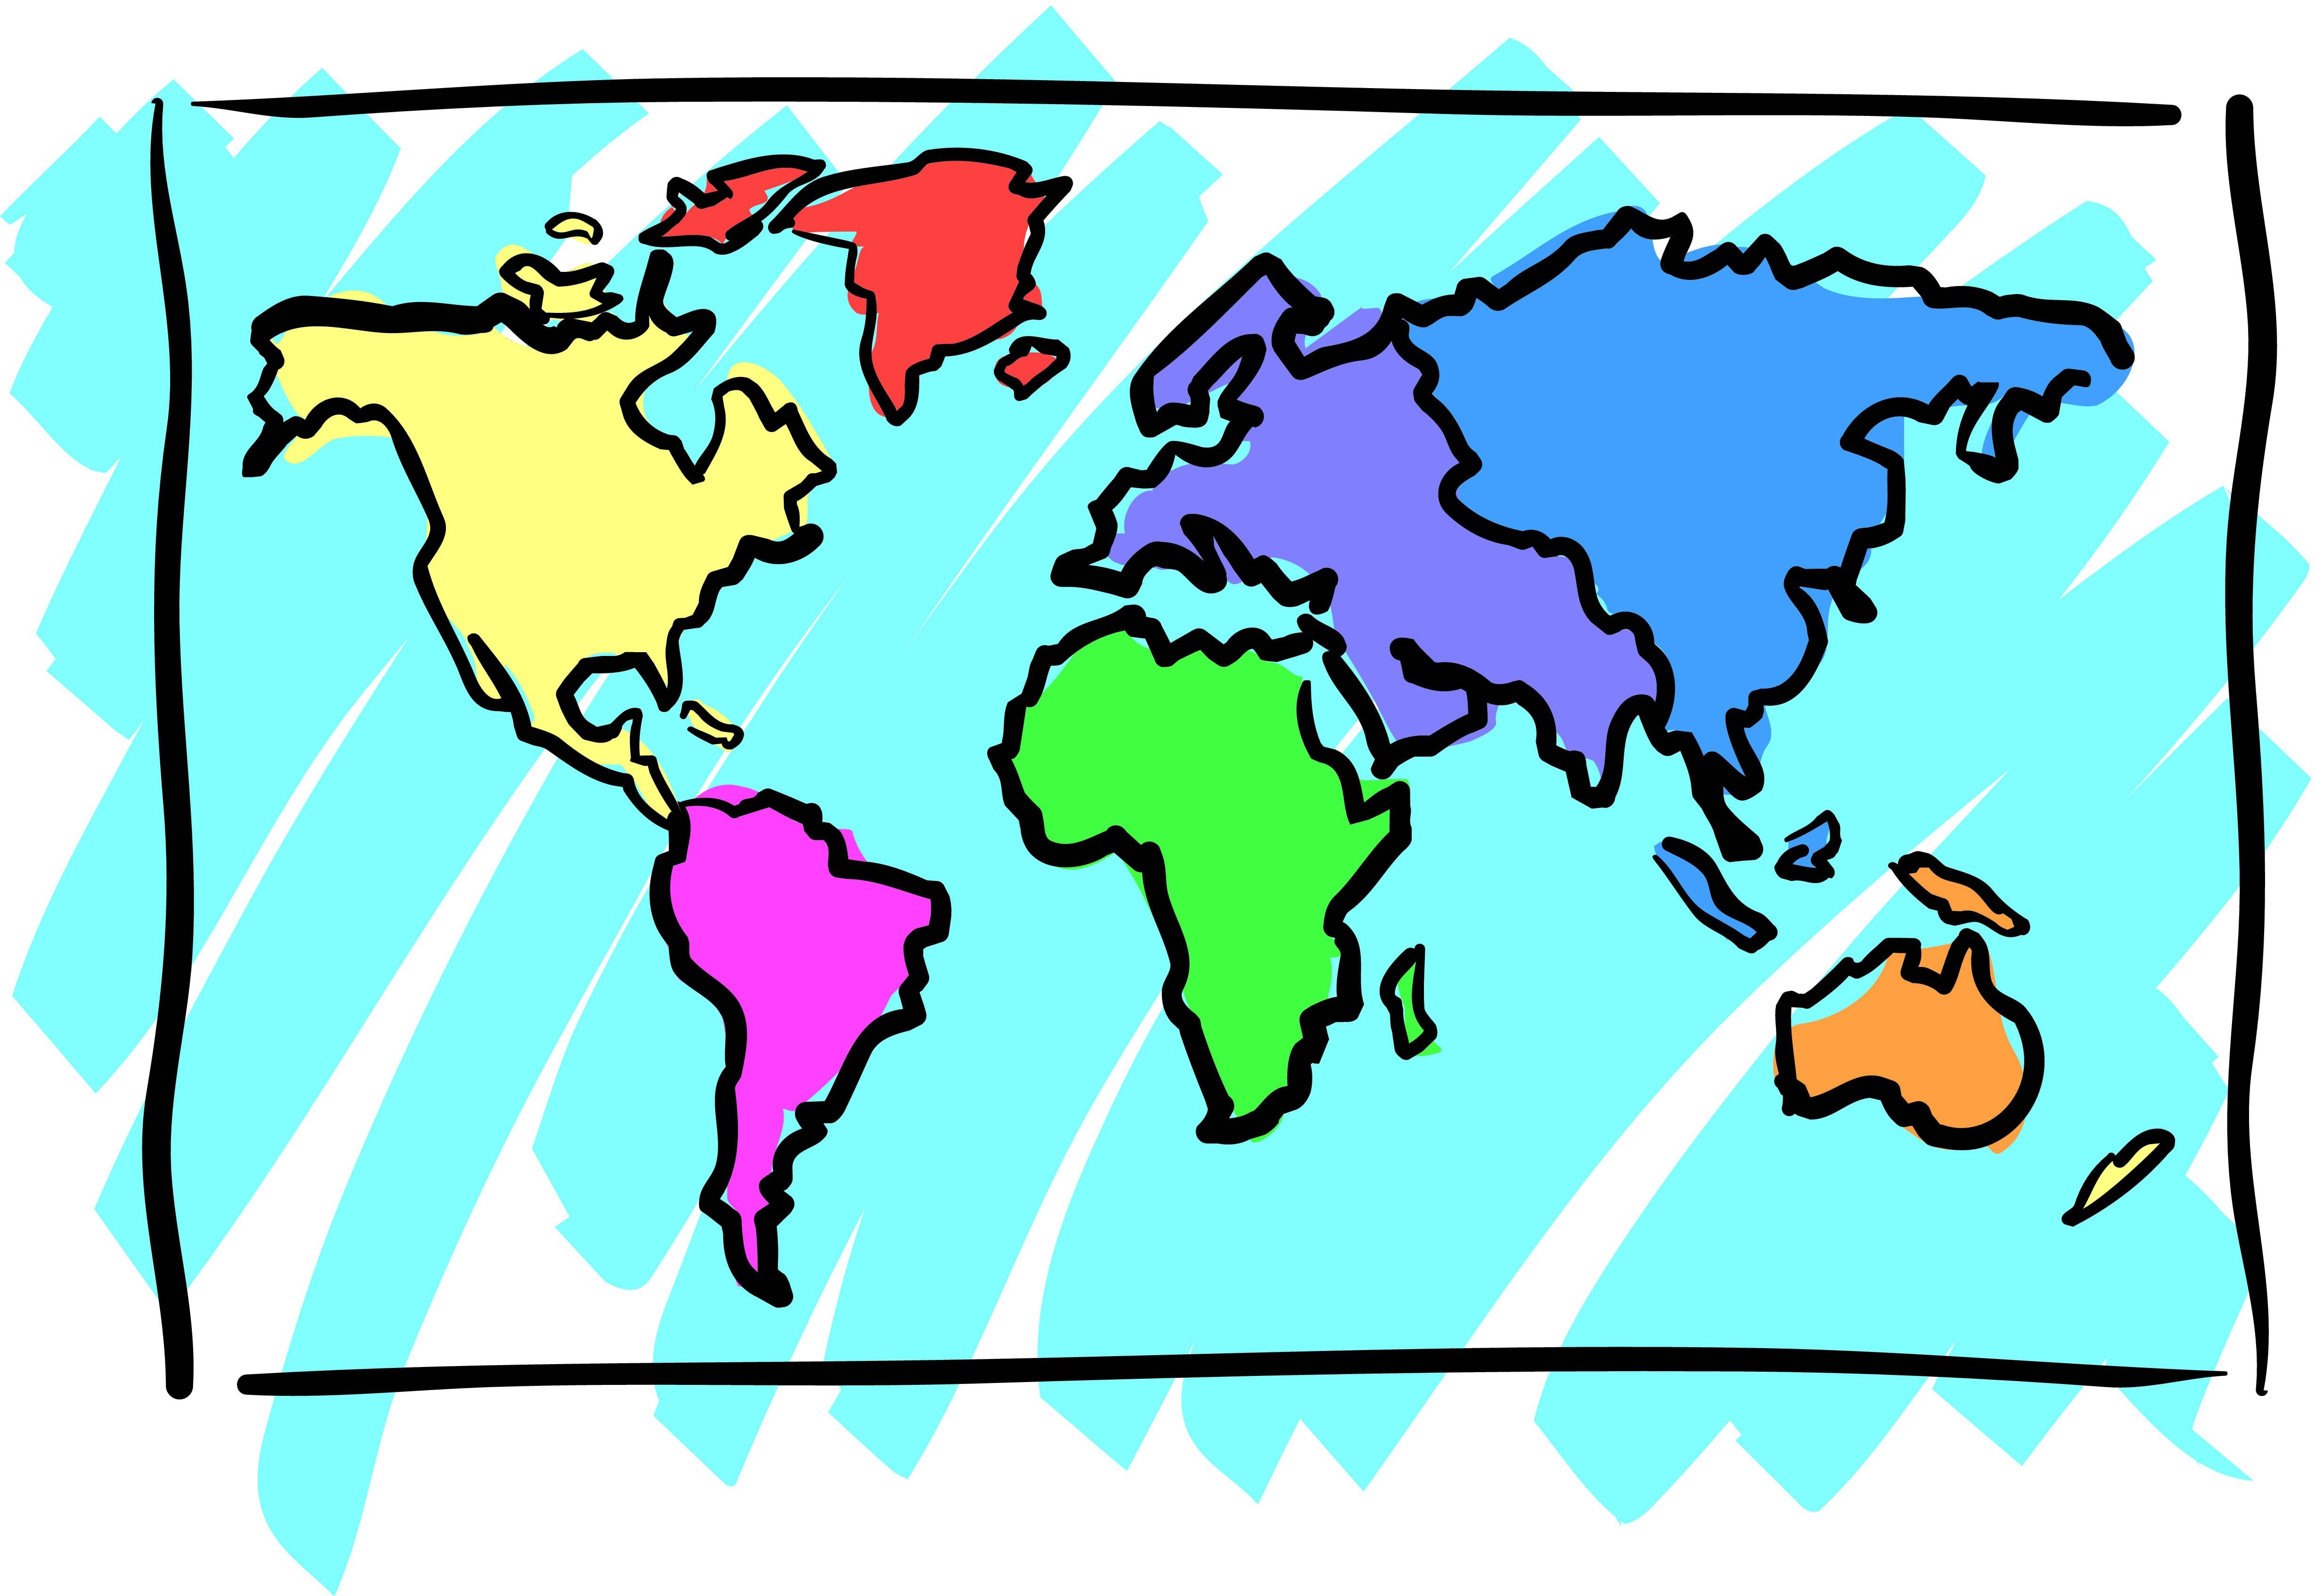 World map clipart free download New Map clipart free clip art on.